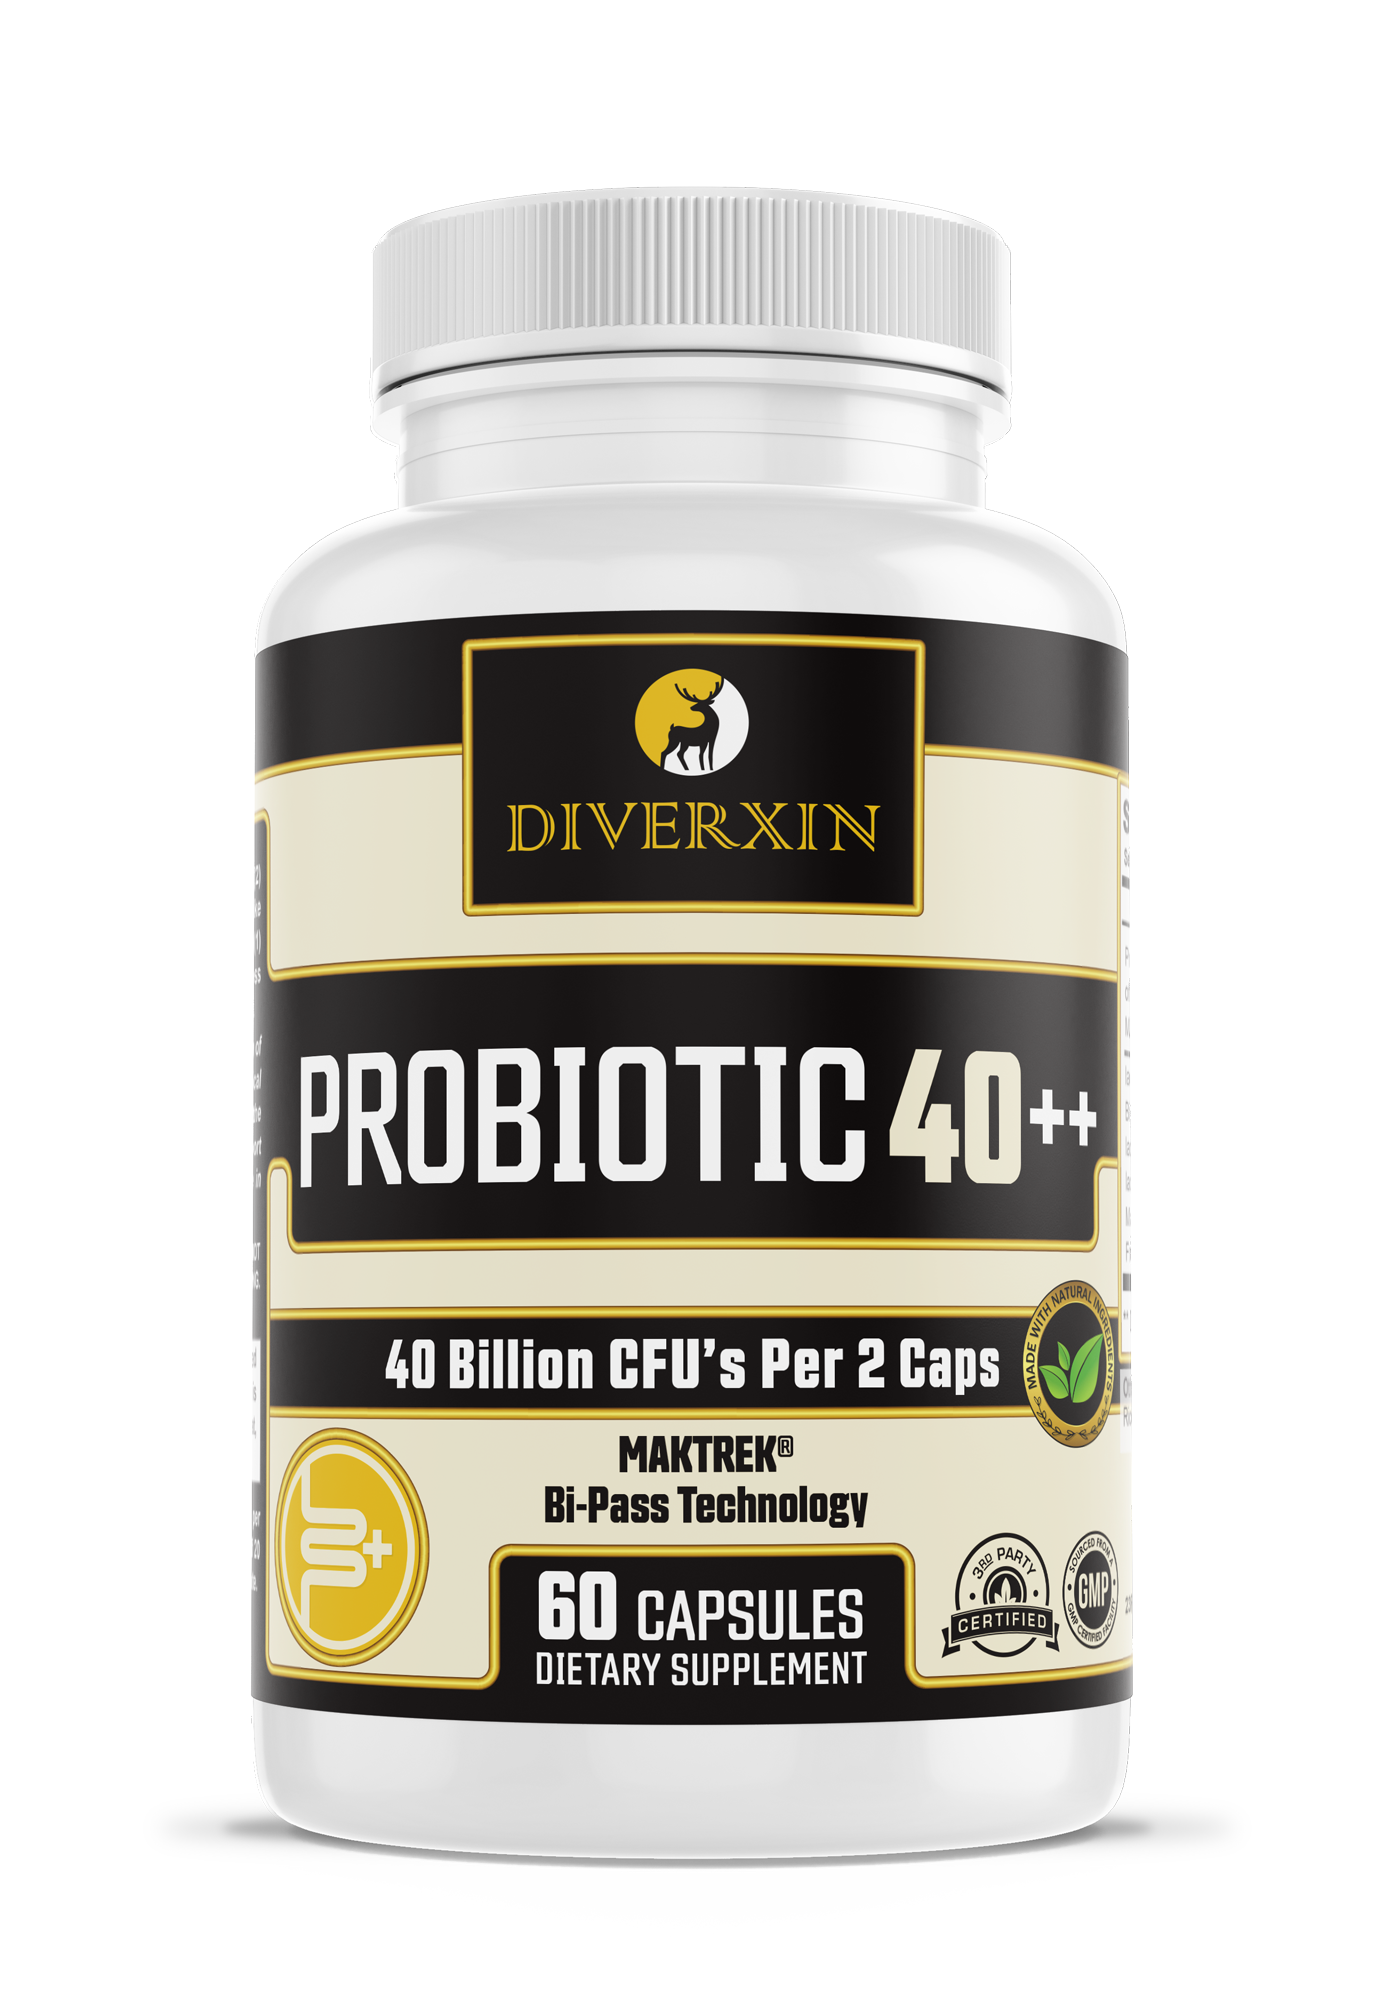 DIVERXIn Probiotics 40++ - RED HOT Probiotics Offer With UPSELL! thumbnail